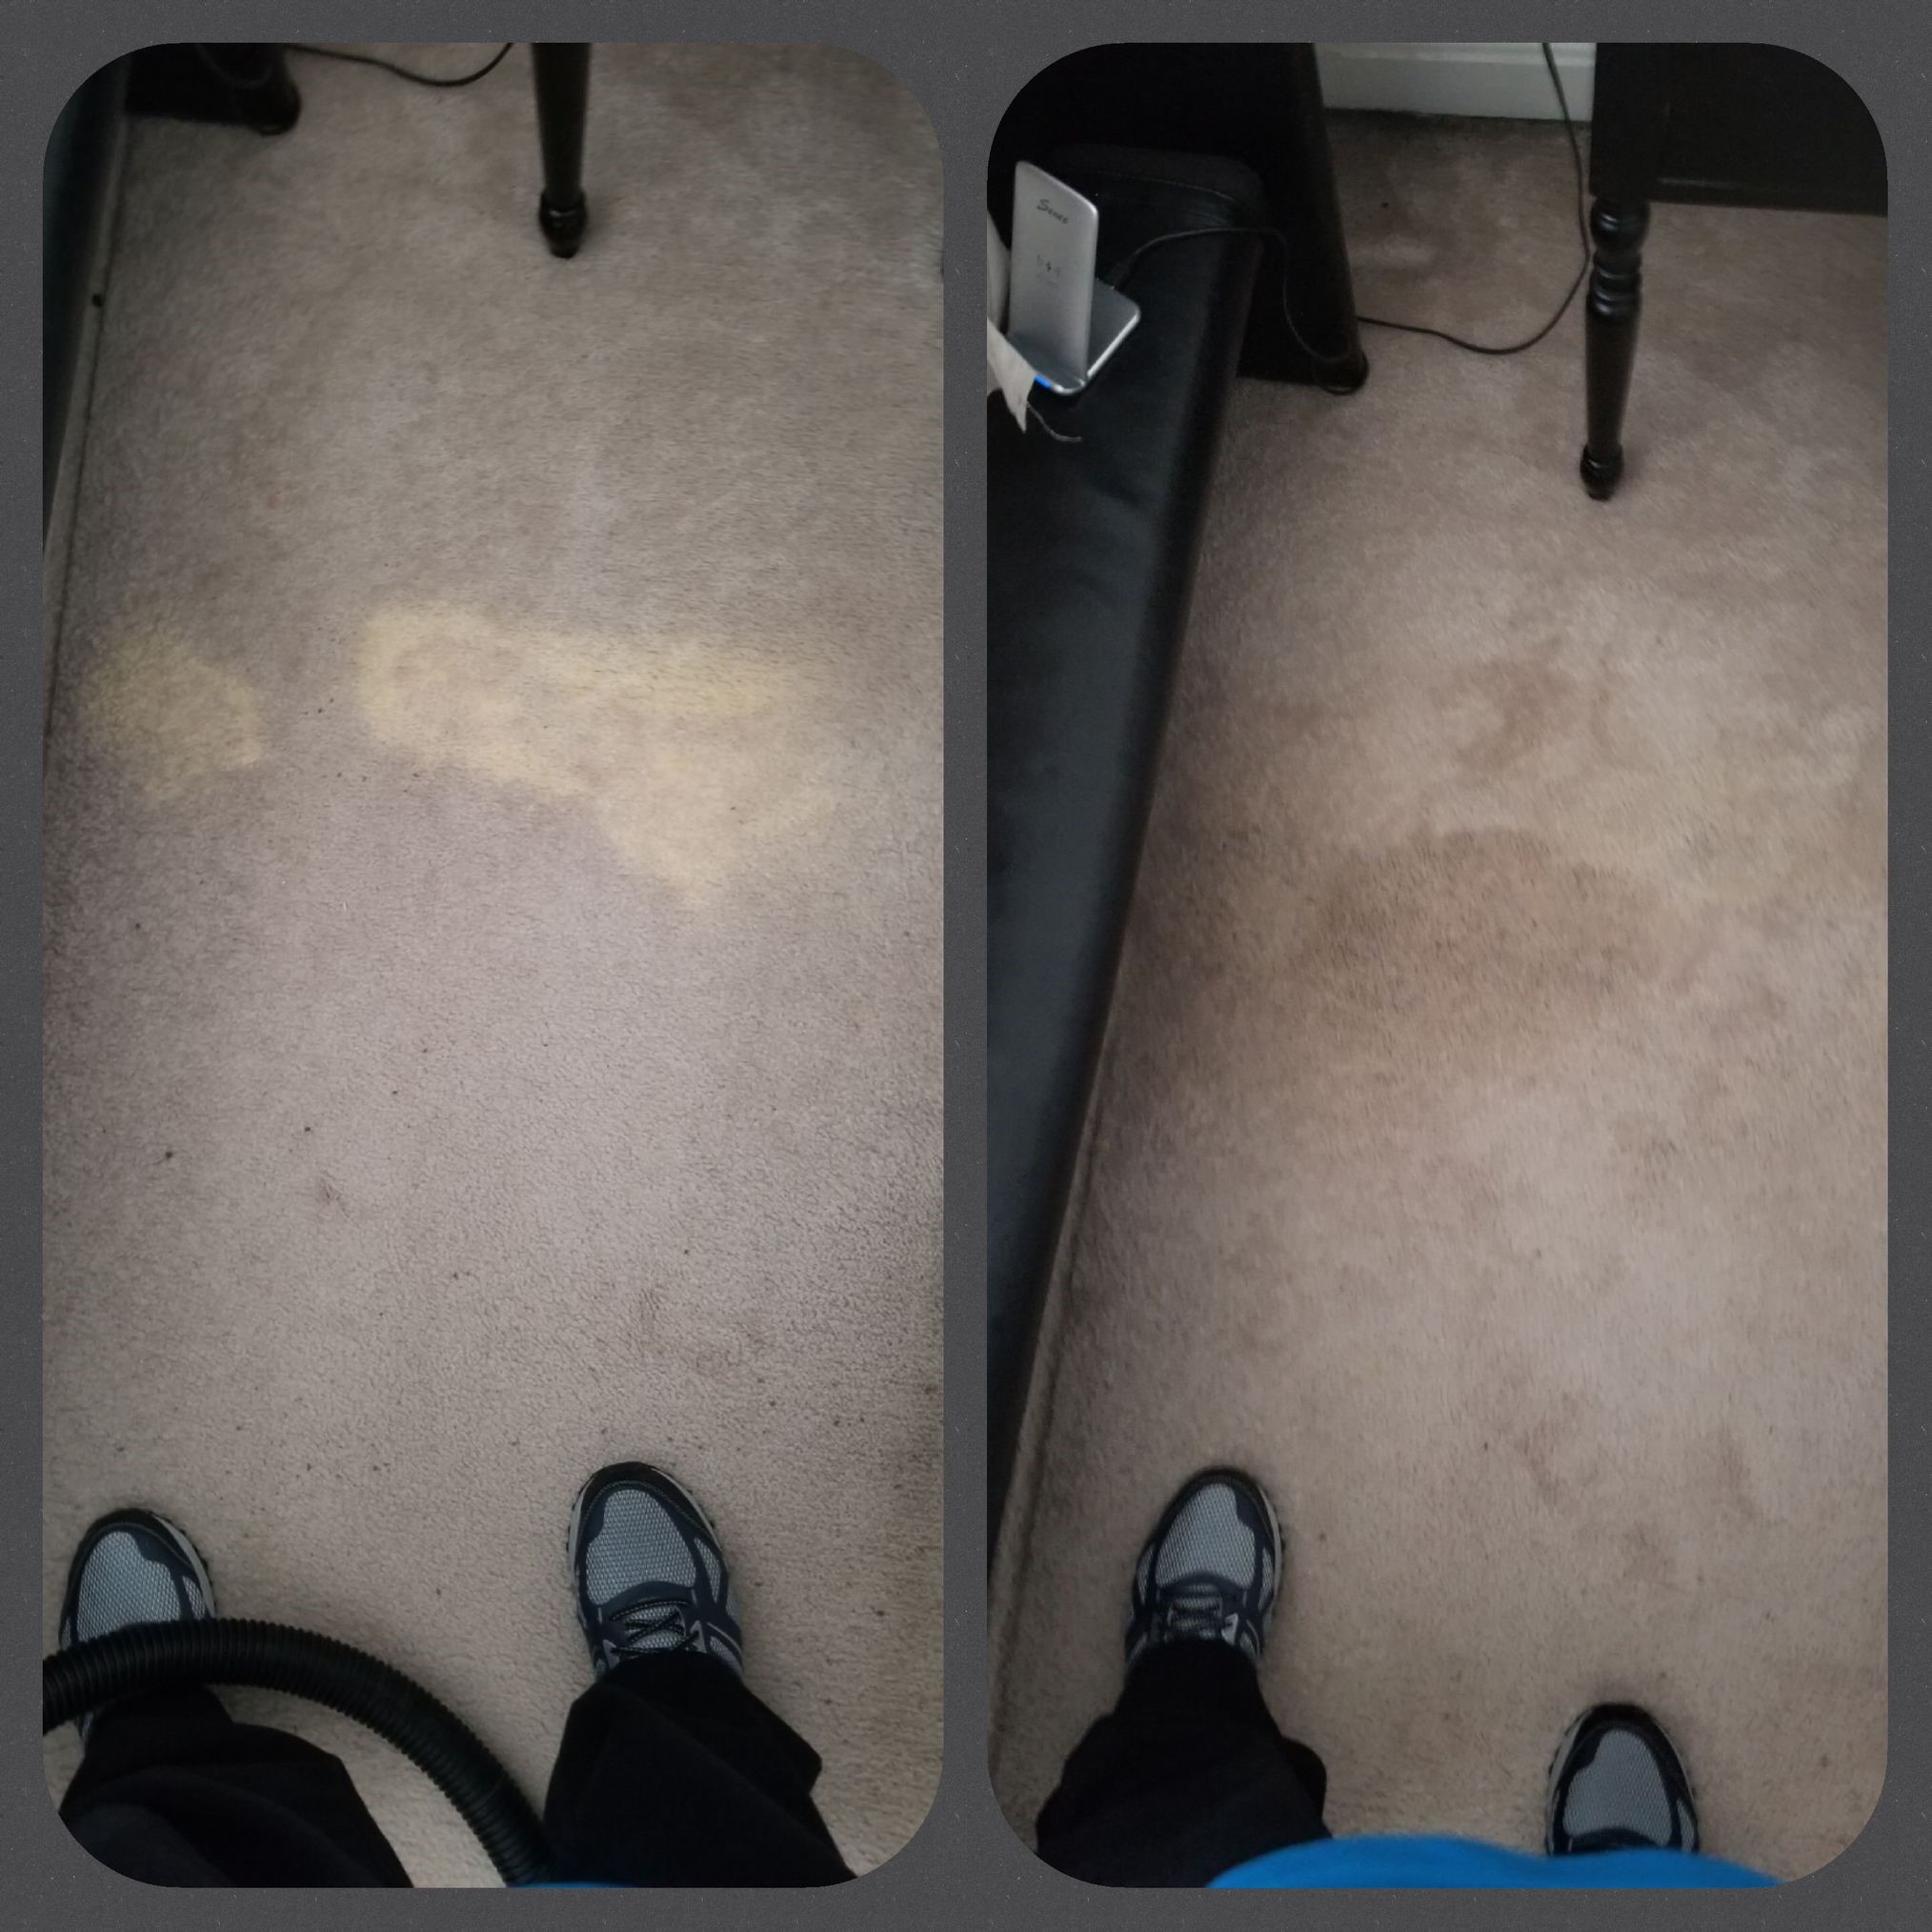 Bleach Spot Removal in Odenton, MD